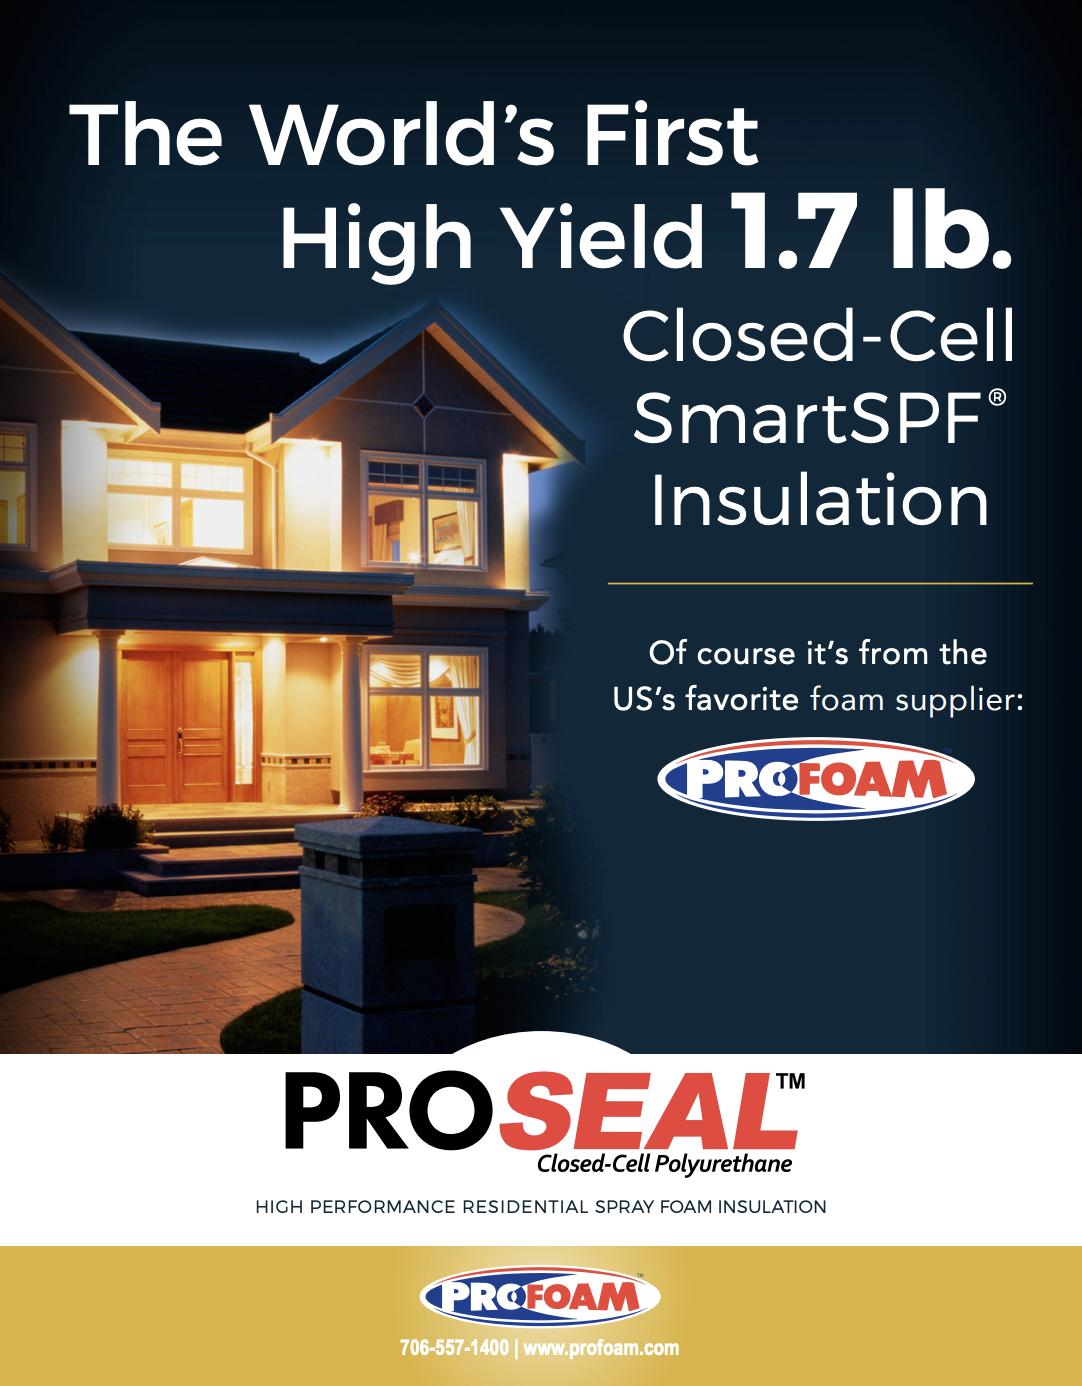 ProSeal Closed-Cell Smart SPF Insulation